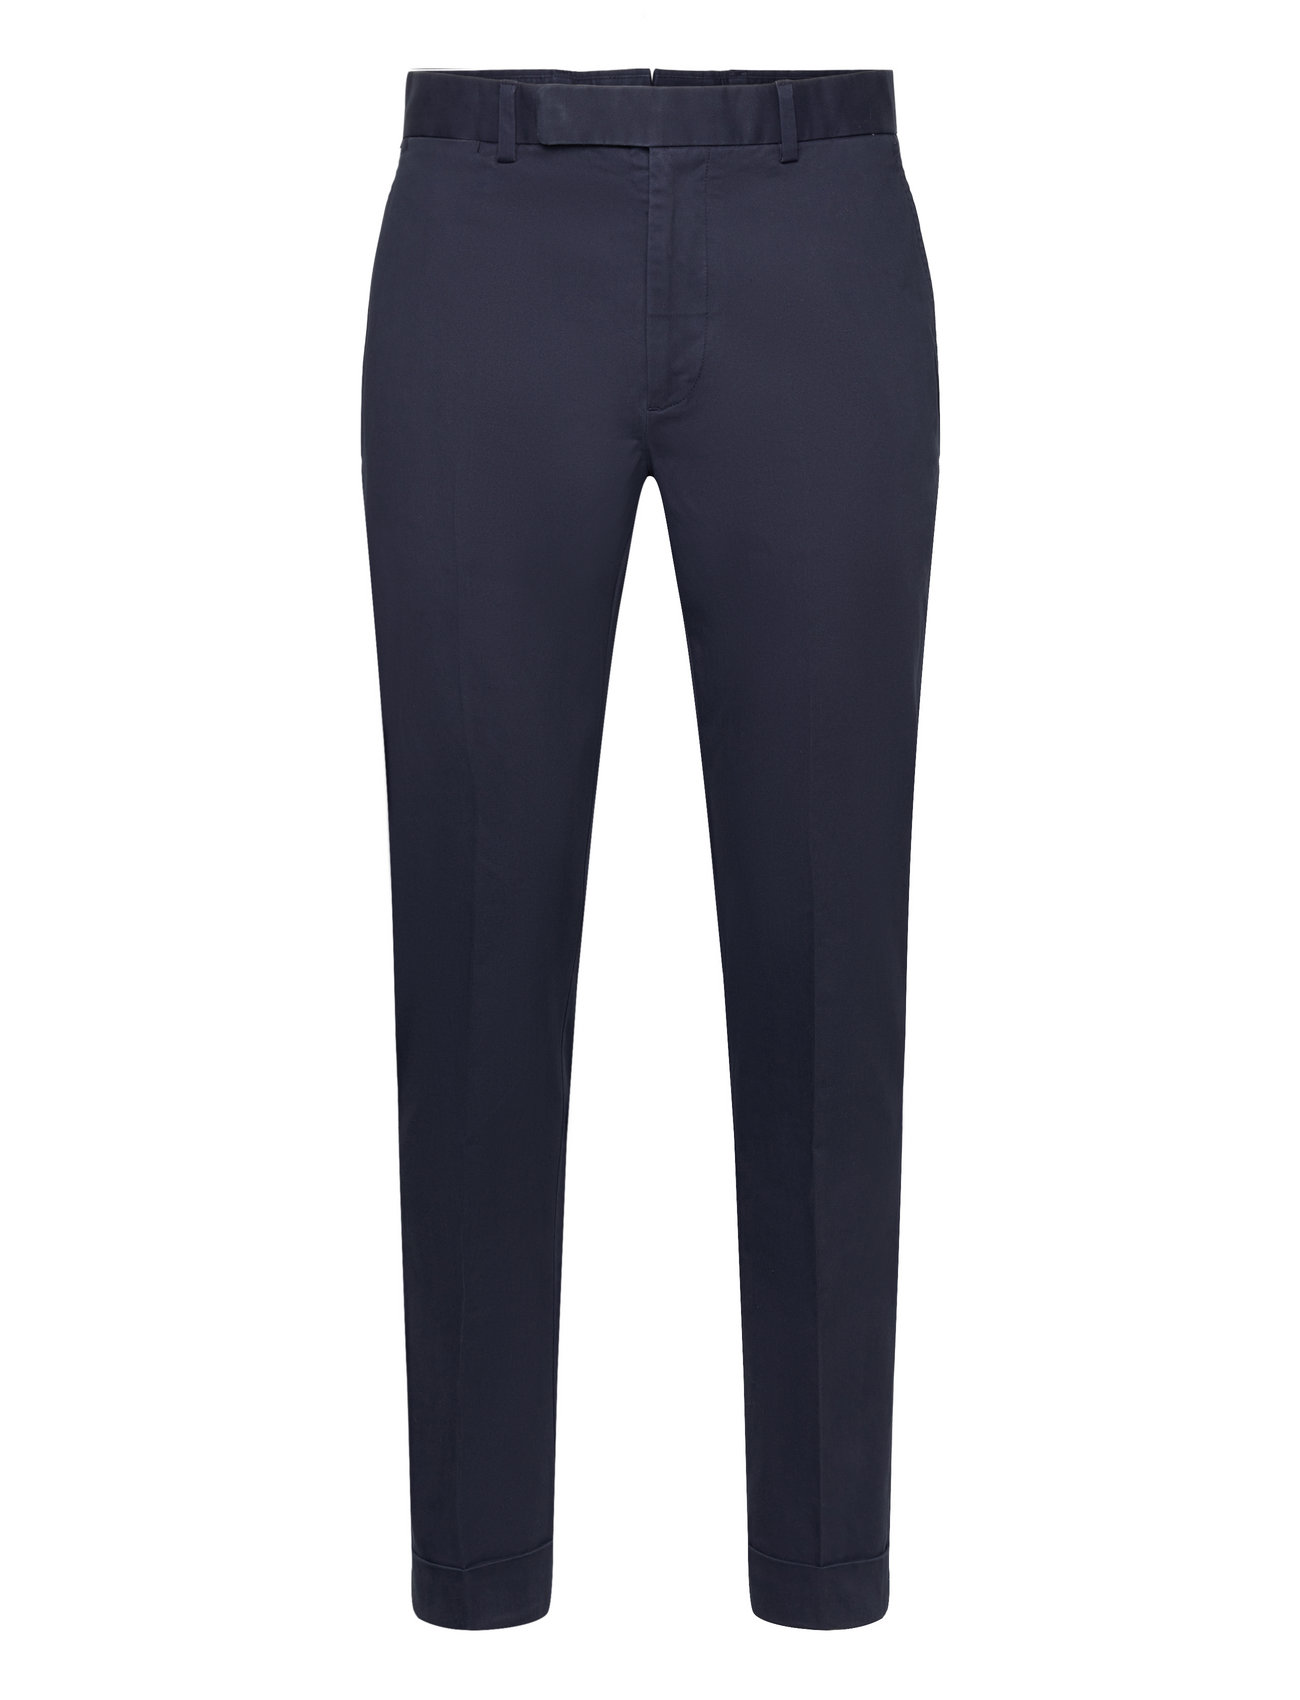 Stretch Chino Suit Trouser Bottoms Trousers Chinos Navy Polo Ralph Lauren